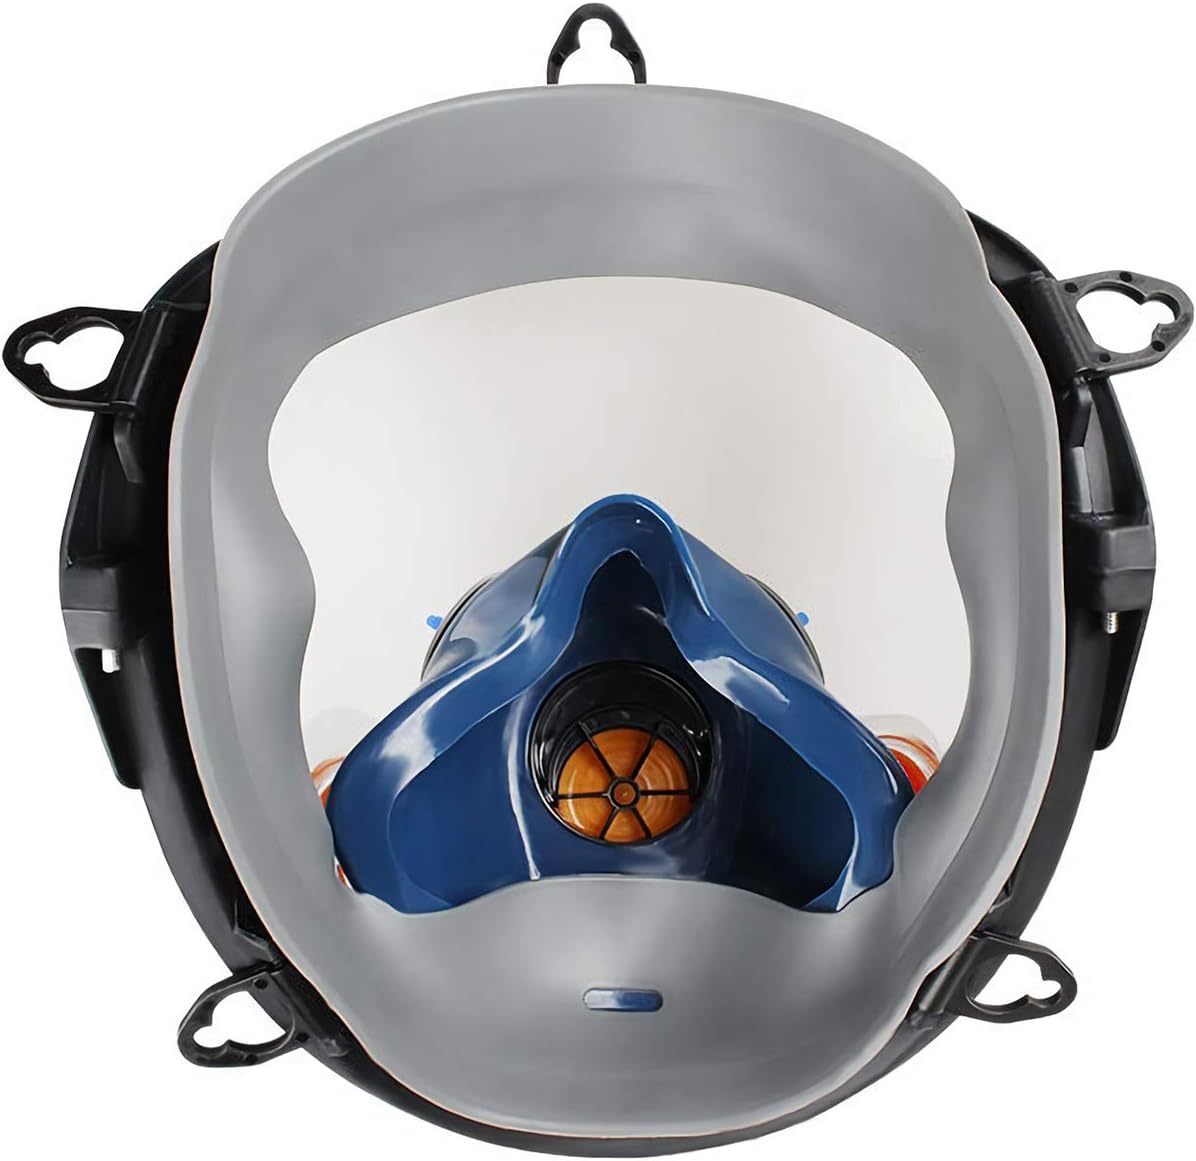 KISCHERS Reusable Full Face Respirator Large Against Dust/Organic Vapors/Smells/Fumes/Sawdust/Asbestos Suitable for Painting,Staining,Car Spraying,Sanding Cutting